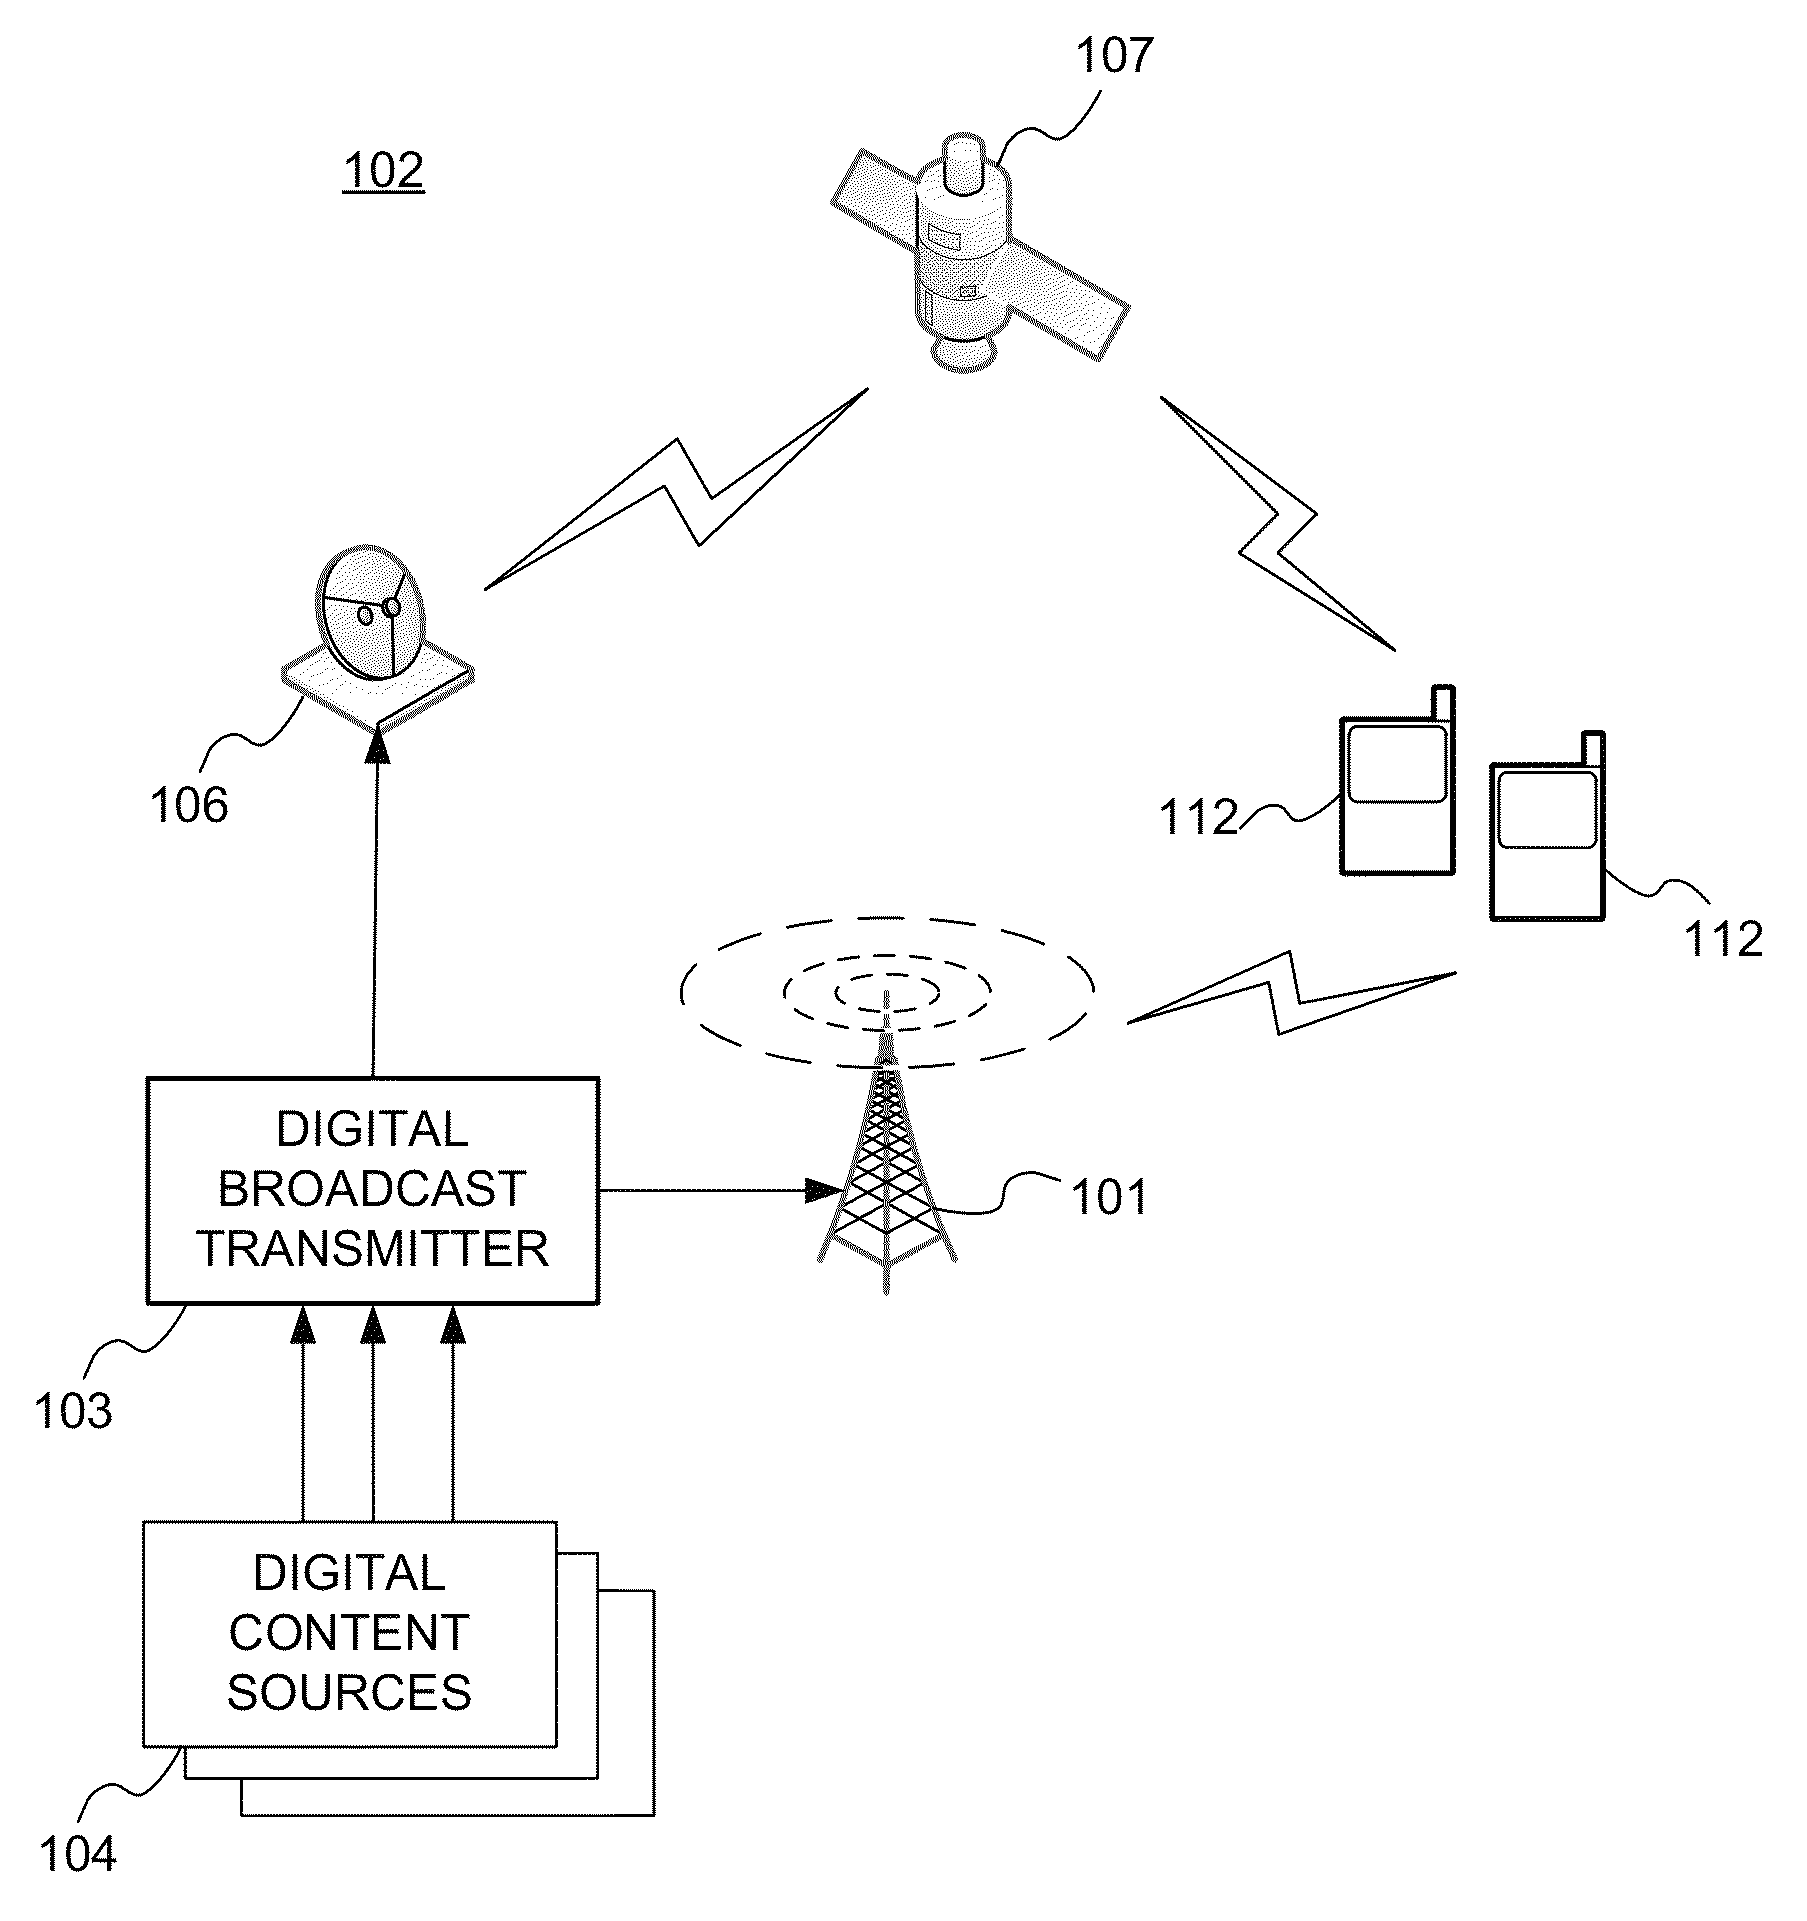 Method and system to enable handover in a hybrid terrestrial satellite network